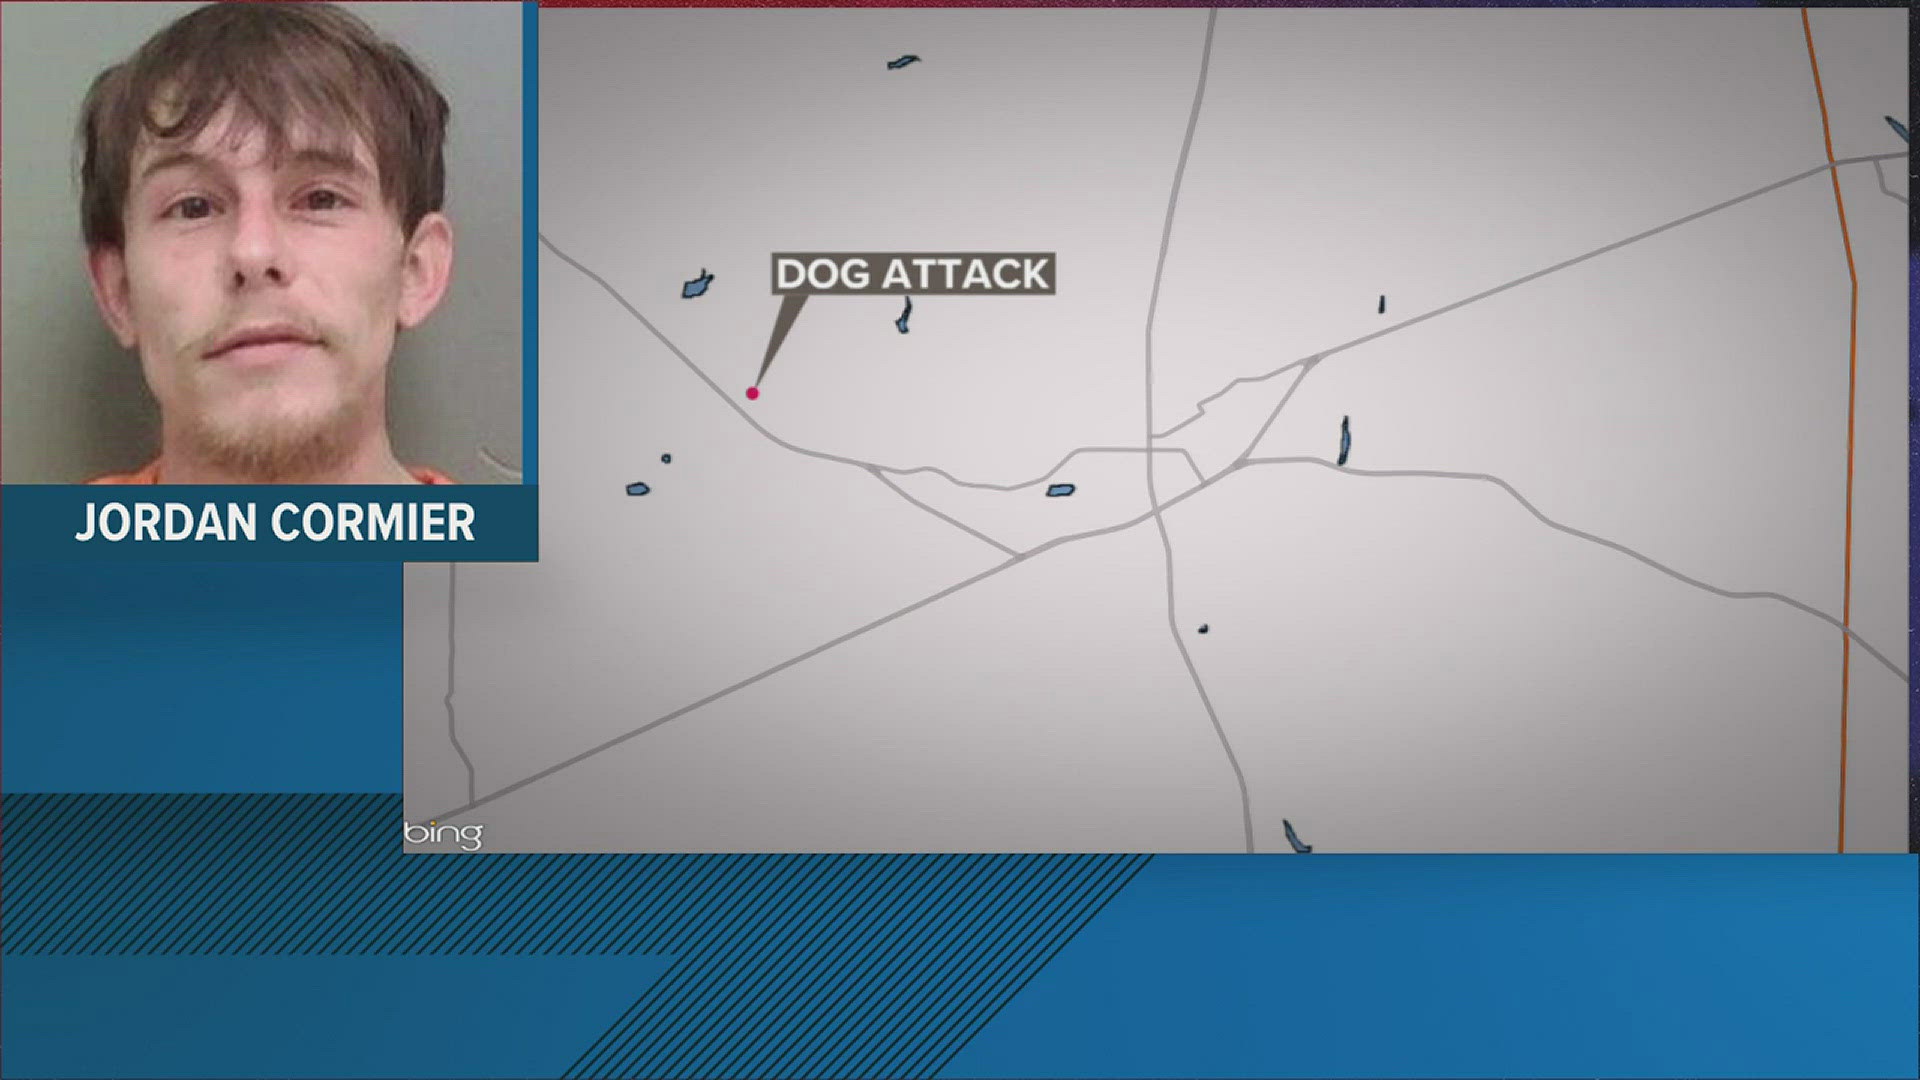 He was charged with "attack by dog resulting in serious bodily injury," according to the Jasper County Sheriff's Office.